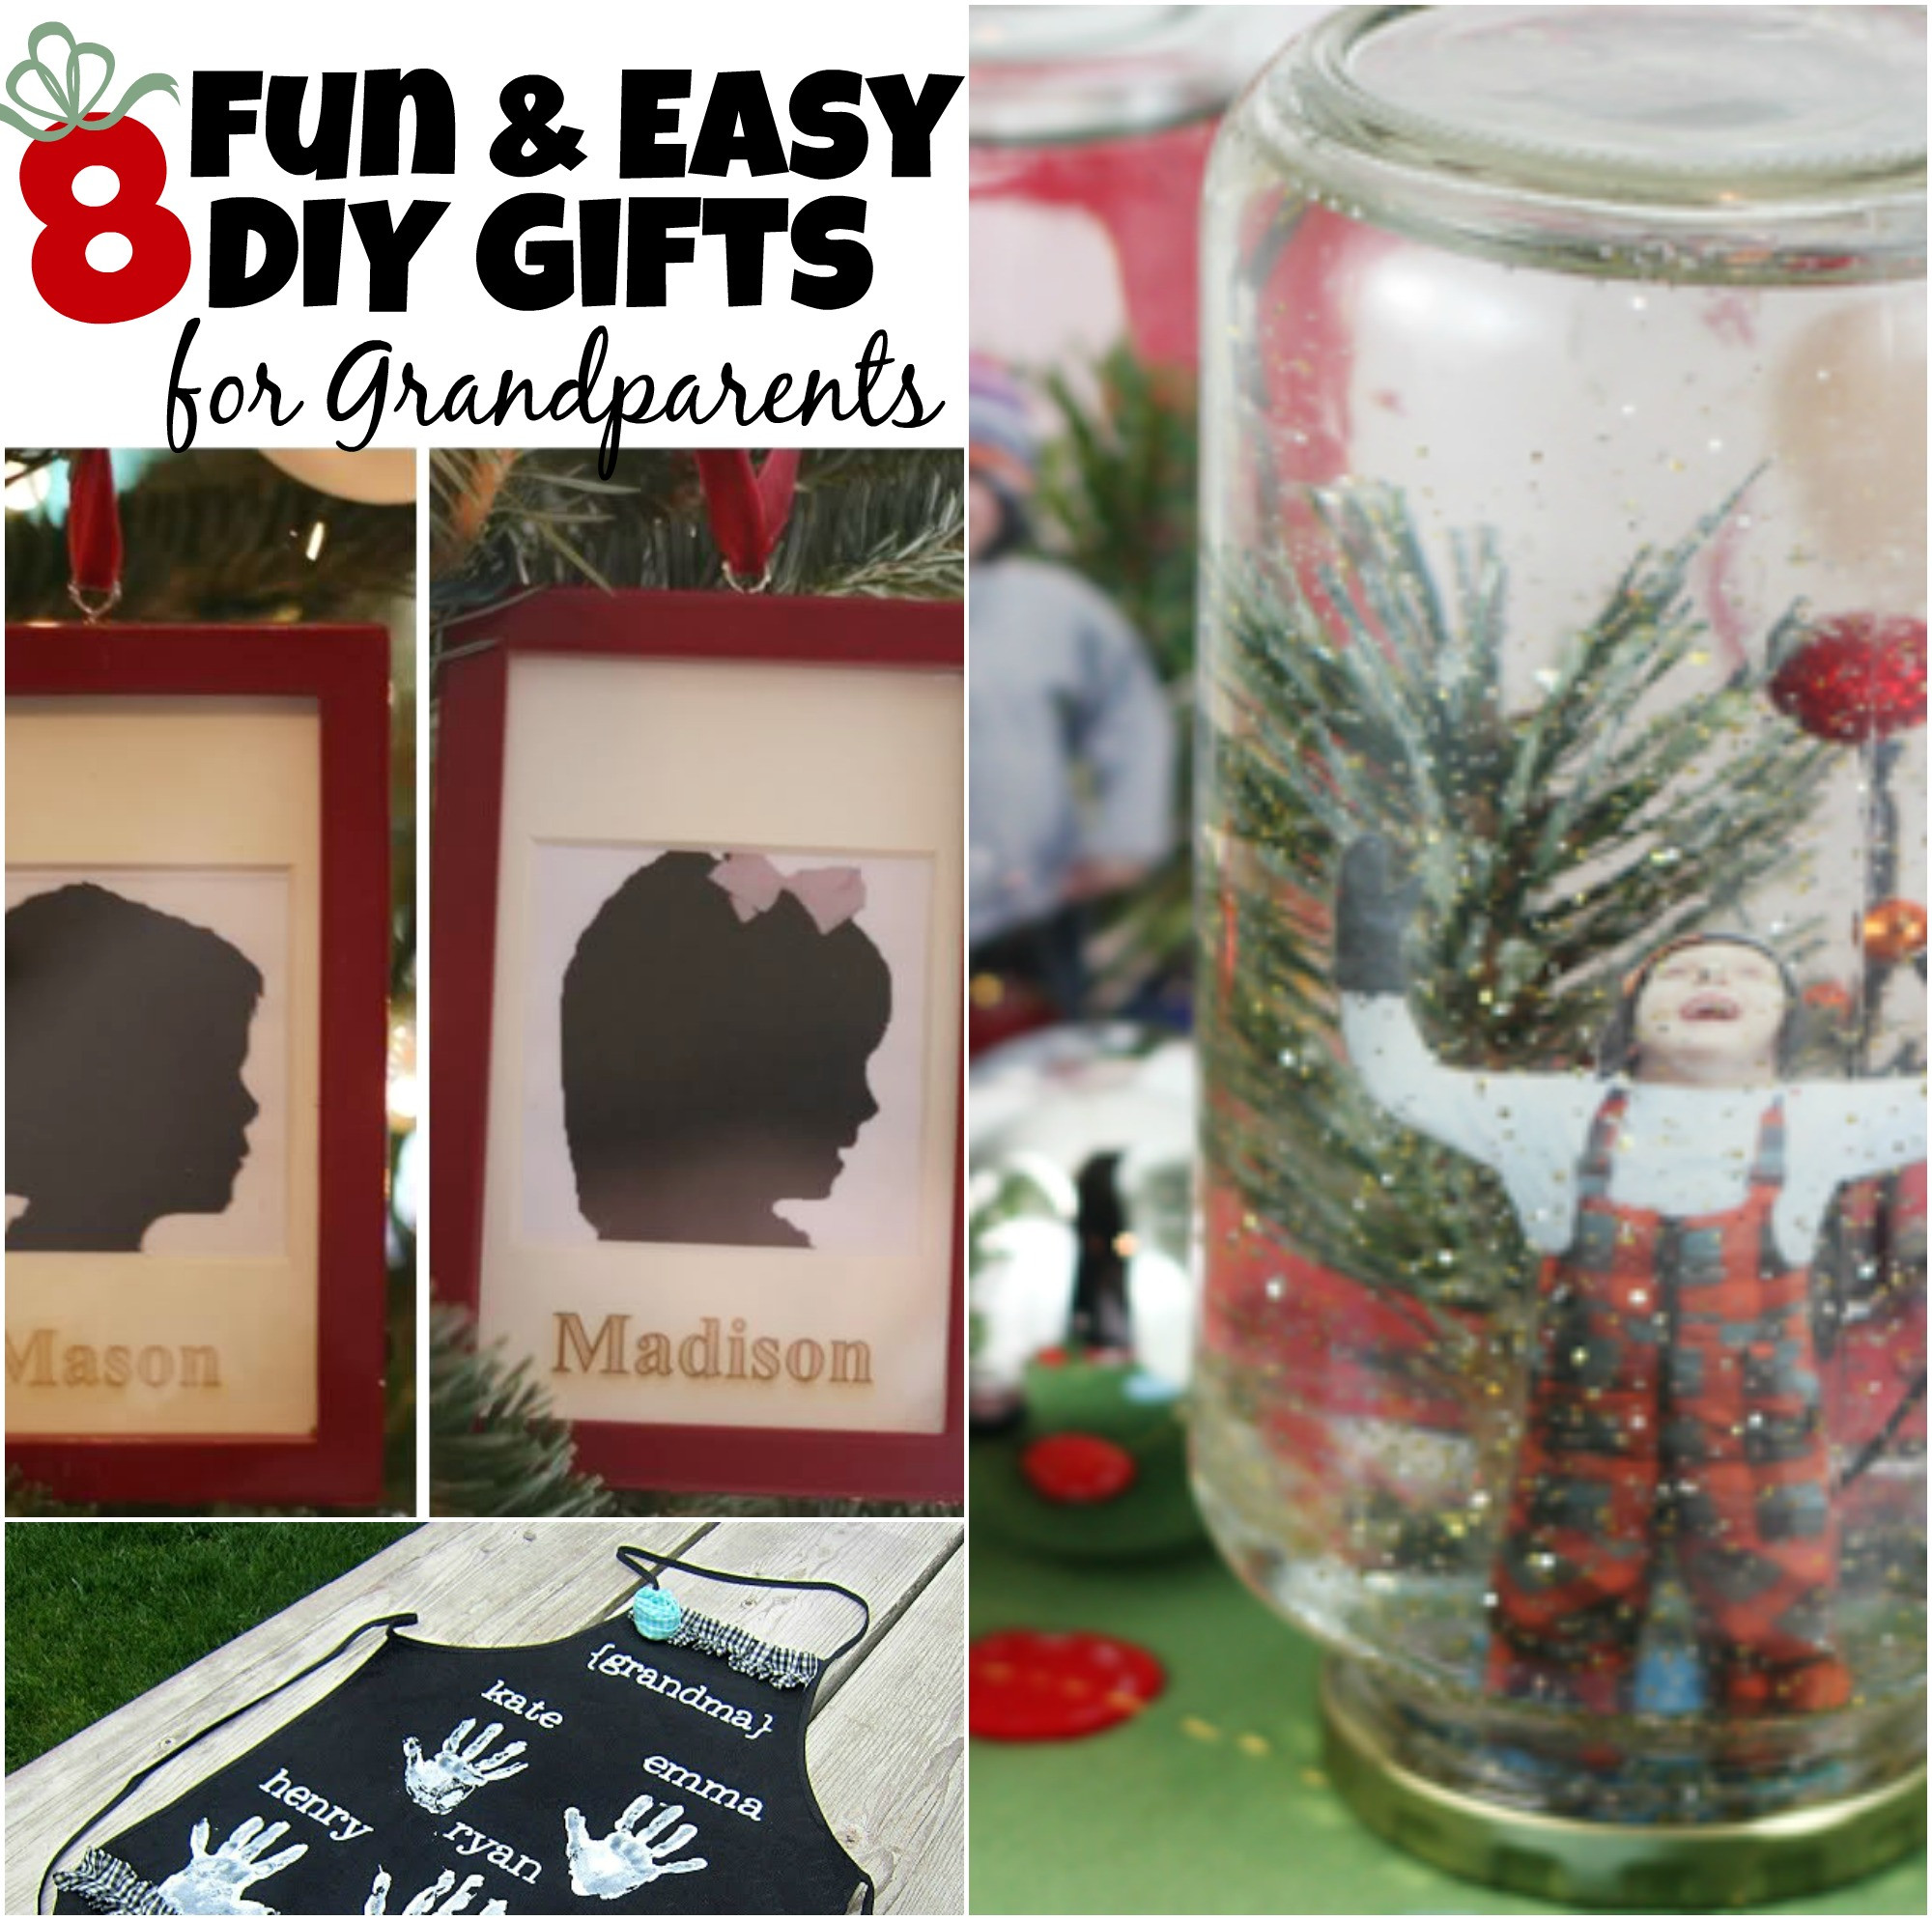 DIY Gift Ideas For Grandparents
 8 DIY Gifts for Grandparents The Realistic Mama